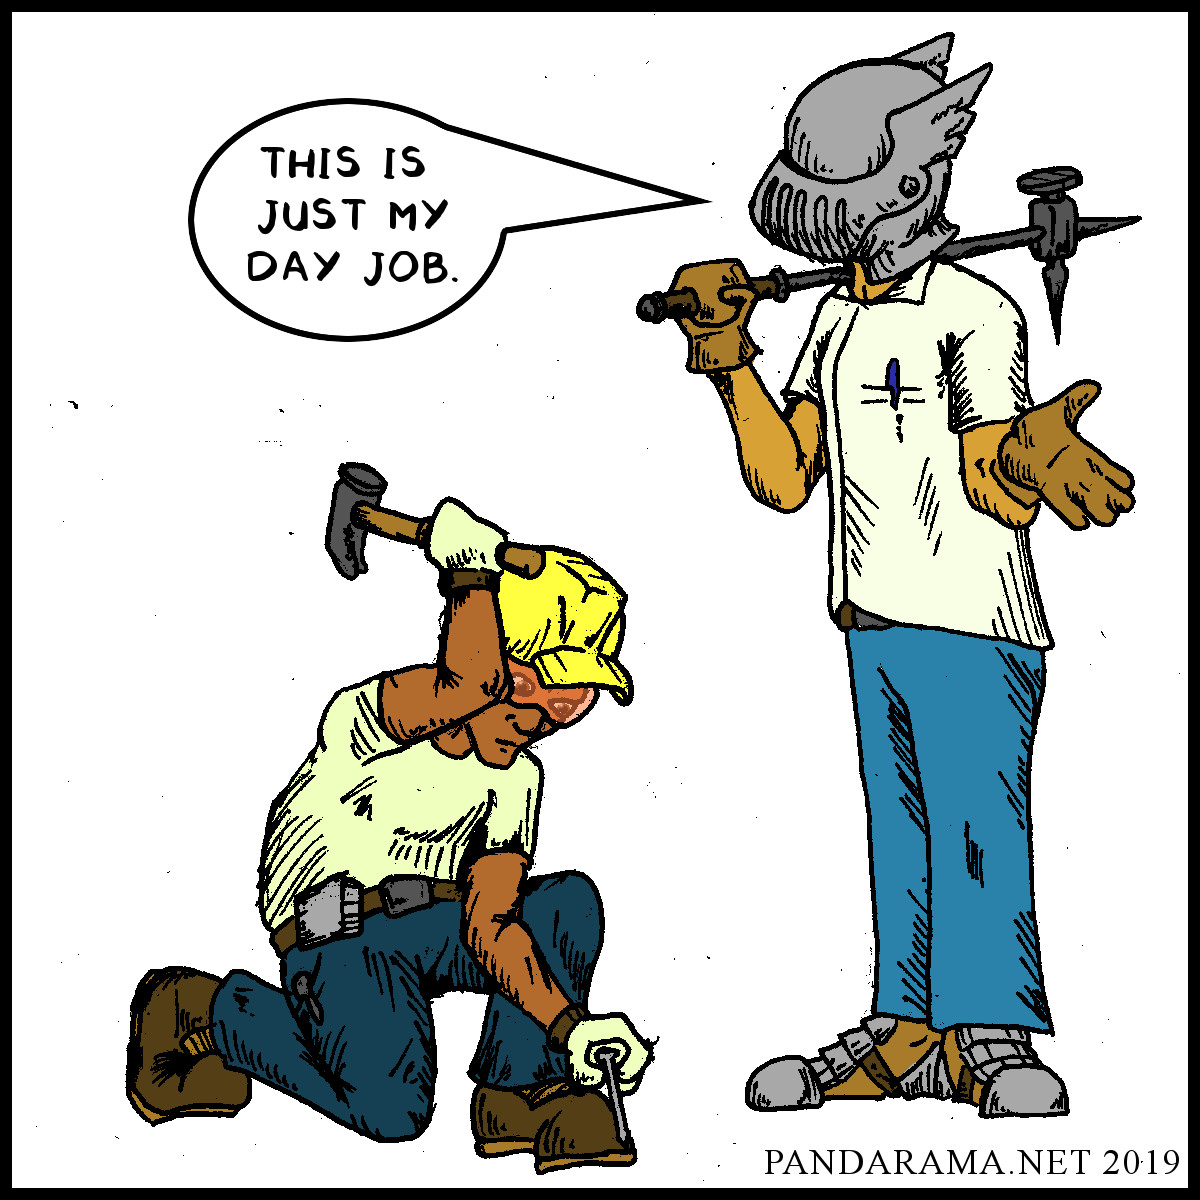 guy in knight's helmet w/ warhammer says to coworker with hard ht and claw hammer that this is just his day job. webcomic